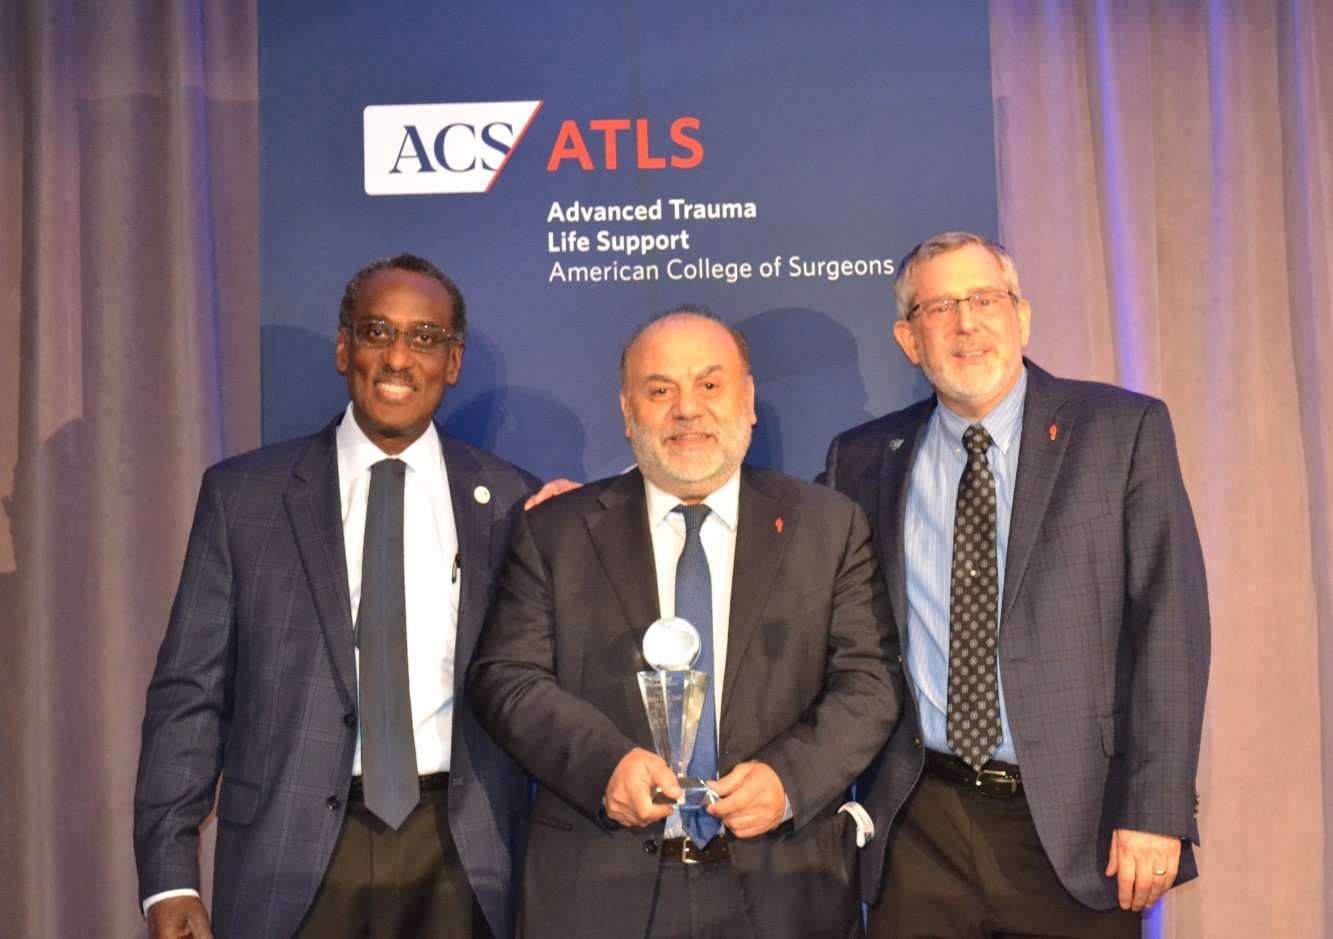 Learn Which Trauma Experts Were Award Winners at COT Annual Meeting ACS